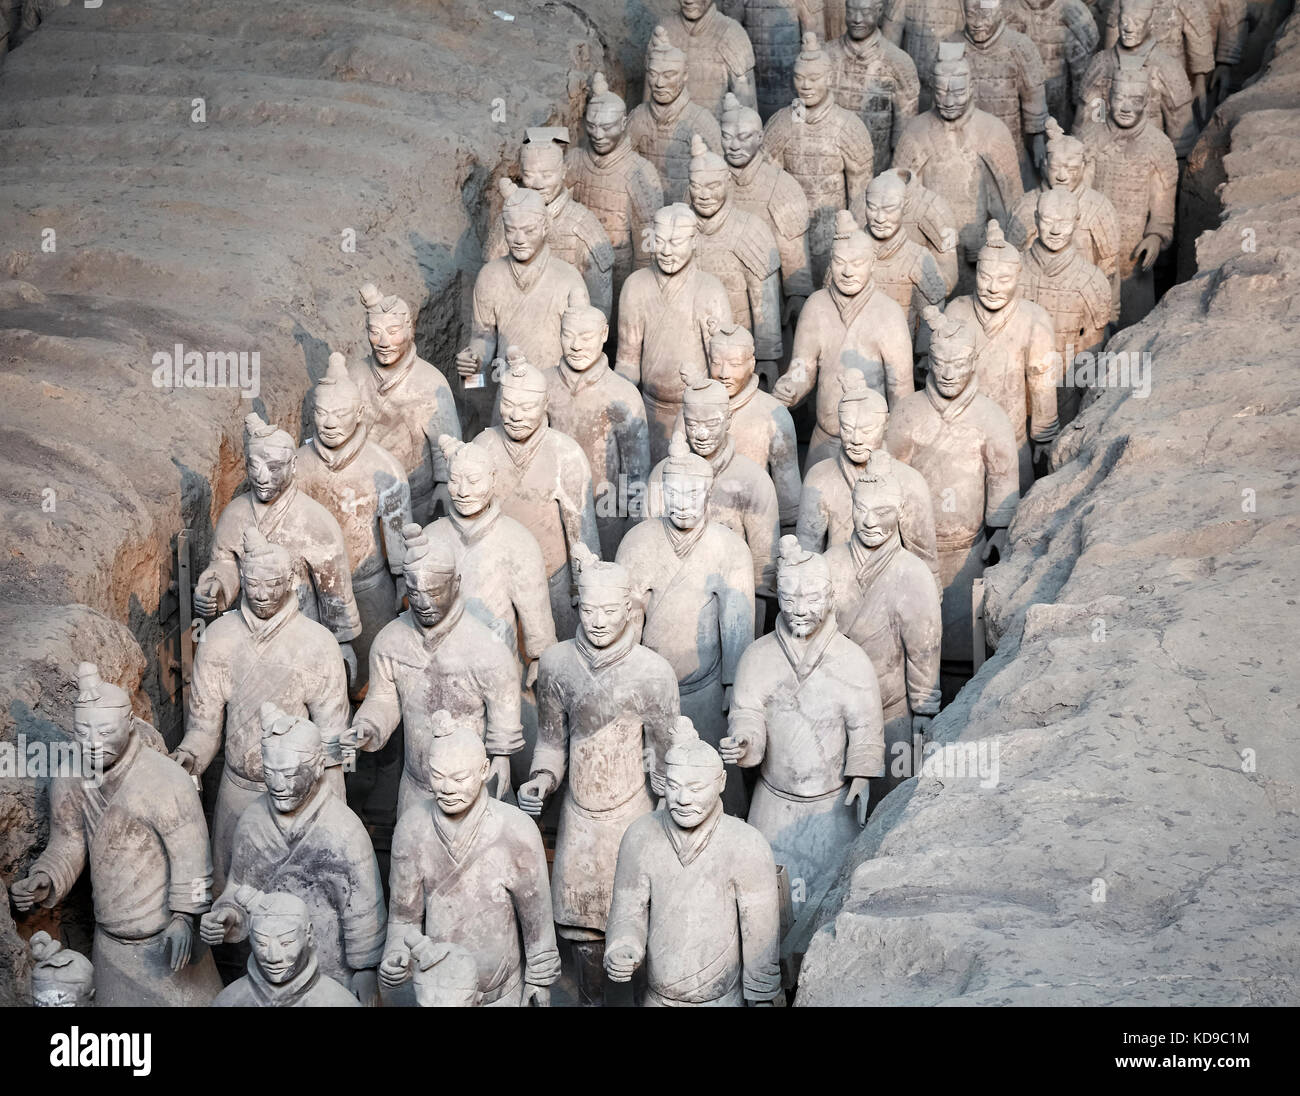 Xian, China - October 4, 2017: Terracotta Army warriors. Discovered in 1974 three pits contain more than 8000 soldiers of Qin Shi Huang. Stock Photo